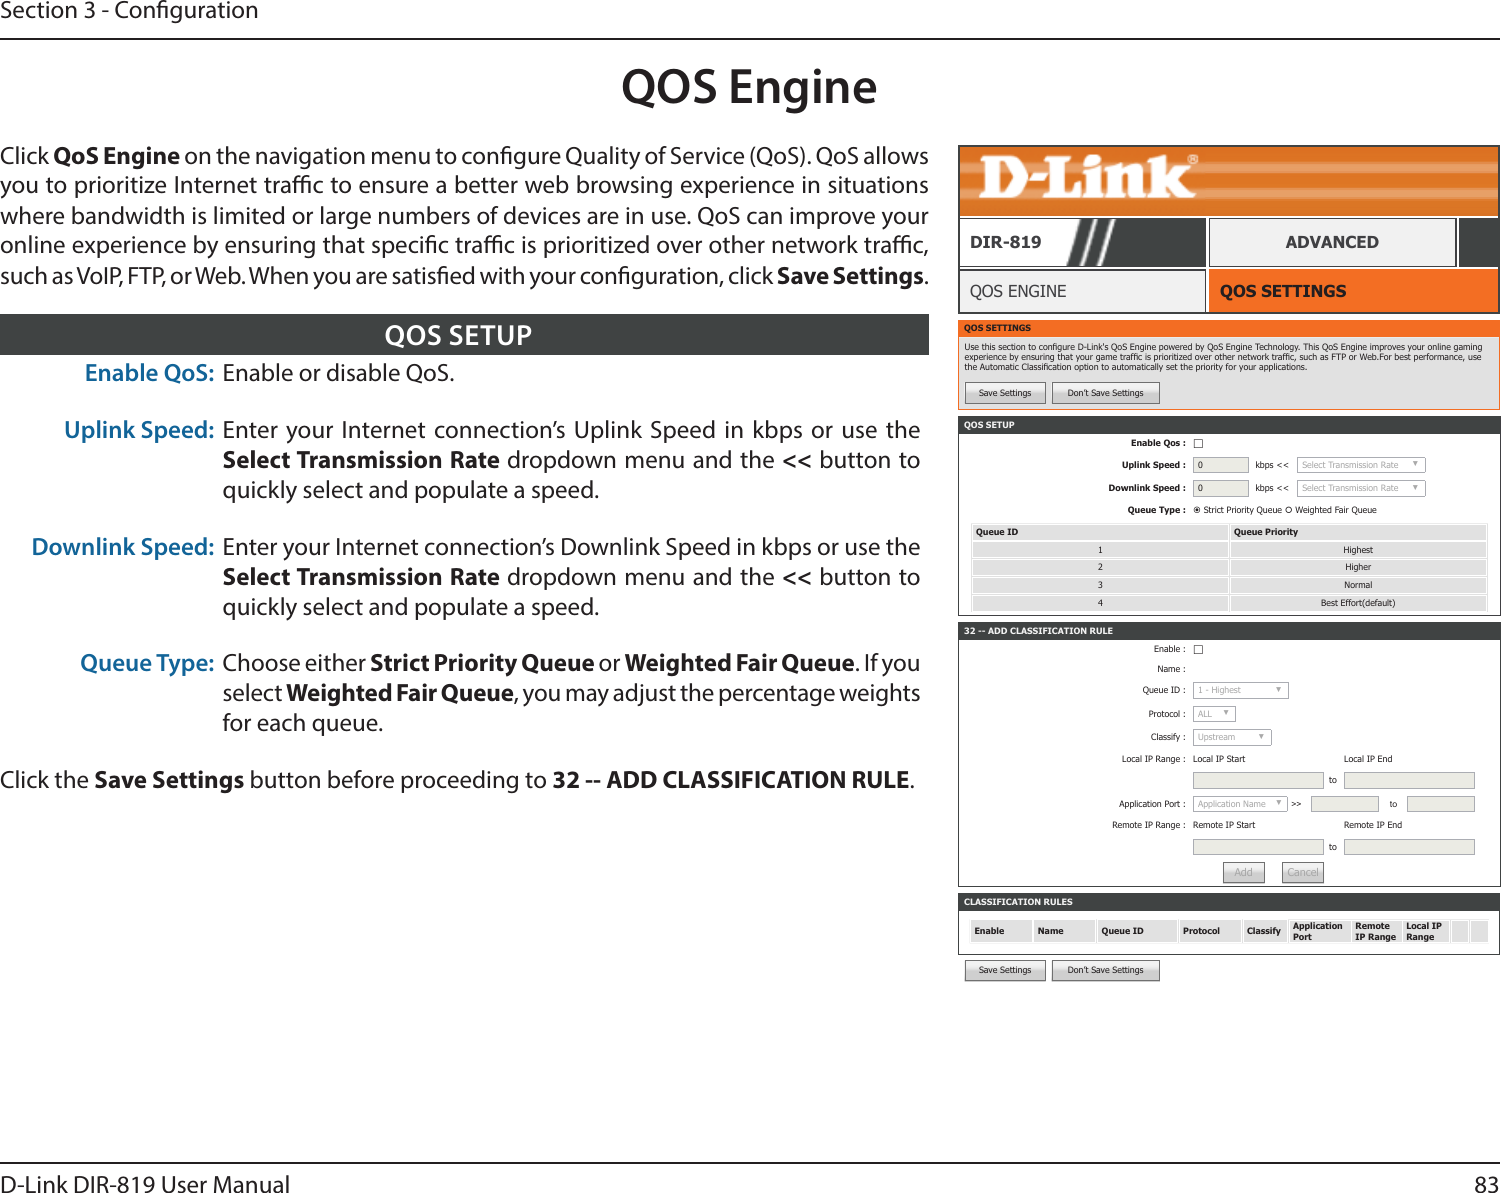 83D-Link DIR-819 User ManualSection 3 - CongurationQOS EngineQOS SETTINGSQOS ENGINEDIR-819 ADVANCEDClick QoS Engine on the navigation menu to congure Quality of Service (QoS). QoS allows you to prioritize Internet trac to ensure a better web browsing experience in situations where bandwidth is limited or large numbers of devices are in use. QoS can improve your online experience by ensuring that specic trac is prioritized over other network trac, such as VoIP, FTP, or Web. When you are satised with your conguration, click Save Settings.QOS SETTINGSUse this section to congure D-Link&apos;s QoS Engine powered by QoS Engine Technology. This QoS Engine improves your online gaming experience by ensuring that your game trafc is prioritized over other network trafc, such as FTP or Web.For best performance, use the Automatic Classication option to automatically set the priority for your applications.Save Settings Don’t Save SettingsCLASSIFICATION RULESEnable Name Queue ID Protocol Classify Application PortRemote IP RangeLocal IP Range32 -- ADD CLASSIFICATION RULEEnable : ☐Name :Queue ID : 1 - Highest ▼Protocol : ALL ▼Classify : Upstream ▼Local IP Range : Local IP Start Local IP EndtoApplication Port : Application Name ▼&gt;&gt; toRemote IP Range : Remote IP Start Remote IP EndtoAdd CancelSave Settings Don’t Save SettingsEnable QoS: Enable or disable QoS.Uplink Speed: Enter your Internet connection’s Uplink Speed in kbps or use the Select Transmission Rate dropdown menu and the &lt;&lt; button to quickly select and populate a speed.Downlink Speed: Enter your Internet connection’s Downlink Speed in kbps or use the Select Transmission Rate dropdown menu and the &lt;&lt; button to quickly select and populate a speed.Queue Type: Choose either Strict Priority Queue or Weighted Fair Queue. If you select Weighted Fair Queue, you may adjust the percentage weights for each queue.Click the Save Settings button before proceeding to 32 -- ADD CLASSIFICATION RULE.QOS SETUPQOS SETUPEnable Qos : ☐Uplink Speed : 0kbps &lt;&lt; Select Transmission Rate ▼Downlink Speed : 0kbps &lt;&lt; Select Transmission Rate ▼Queue Type :  Strict Priority Queue  Weighted Fair QueueQueue ID Queue Priority1 Highest2 Higher3 Normal4 Best Effort(default)